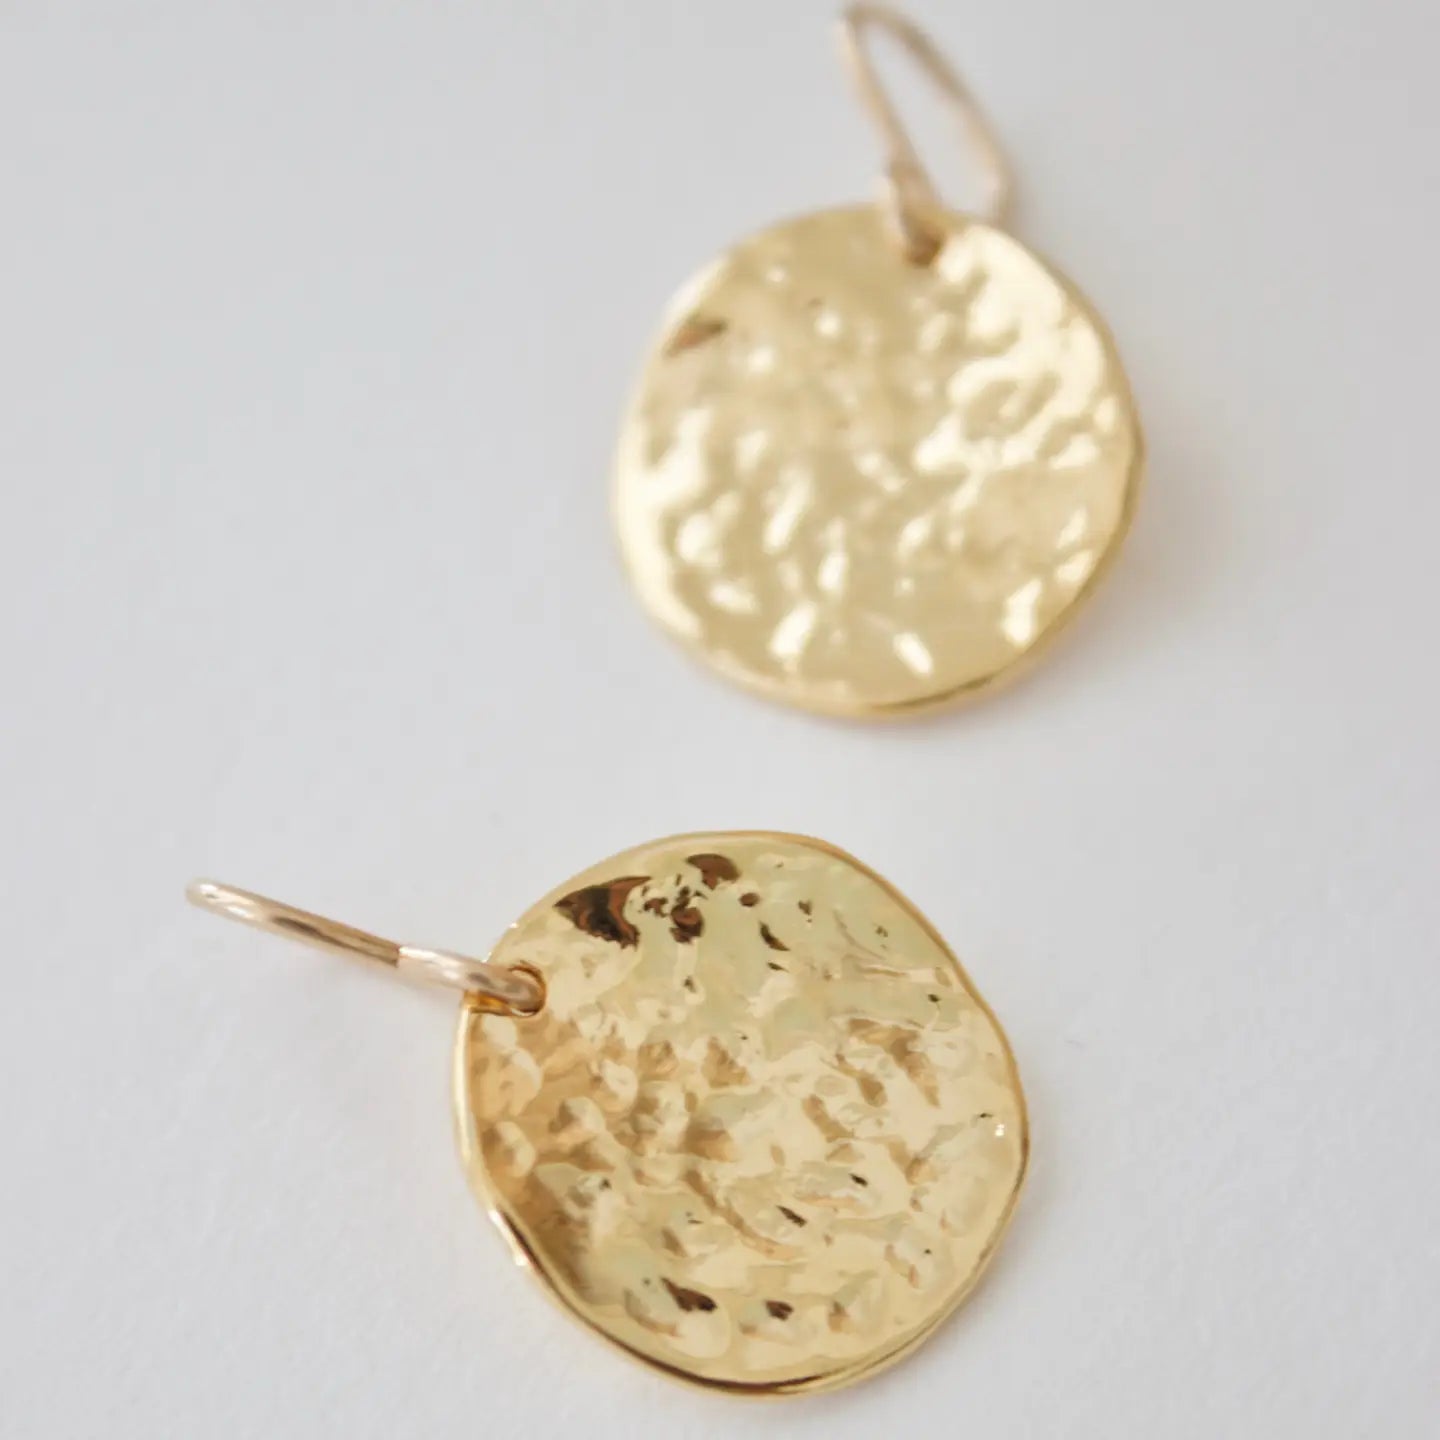 The Gold Hammered Medallion Earrings by Katie Waltman Jewelry